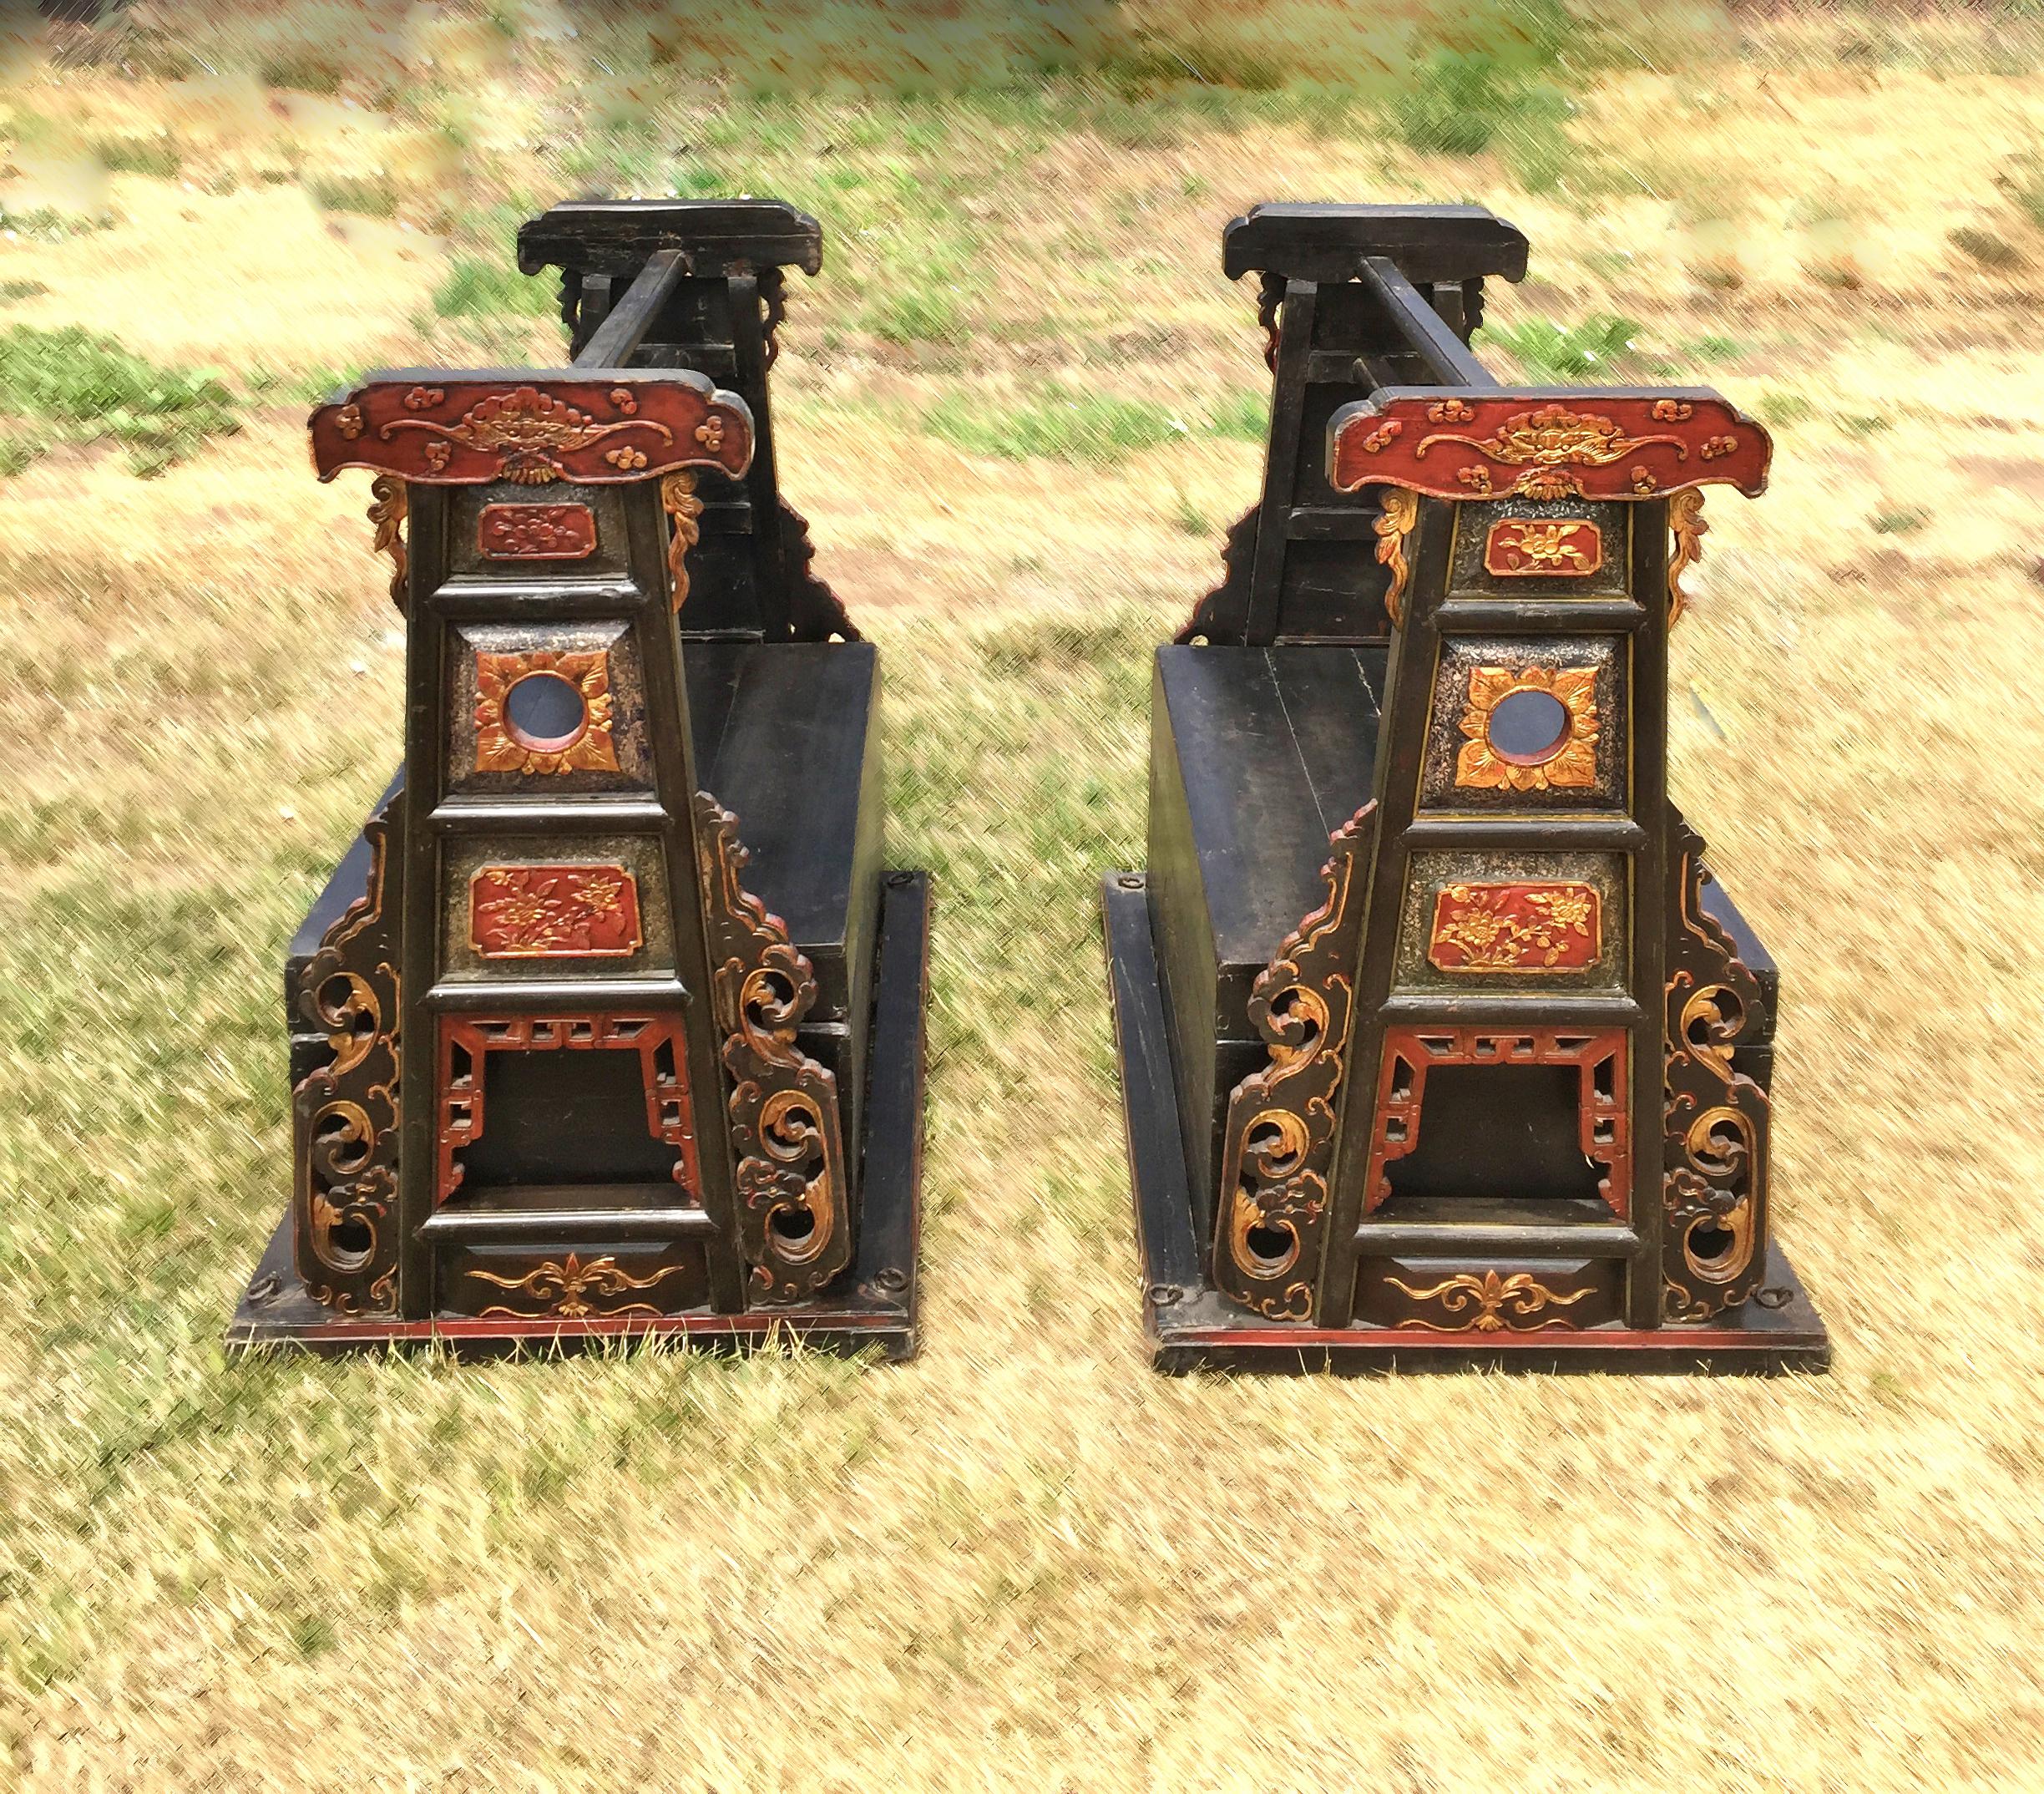 A Pair of rare Chinese republic era wedding baskets. The use of red lacquer and gilding provides a visual contrast against the mainly black baskets. The sides of the basket are elaborately decorated with carved flowers and auspicious symbols.